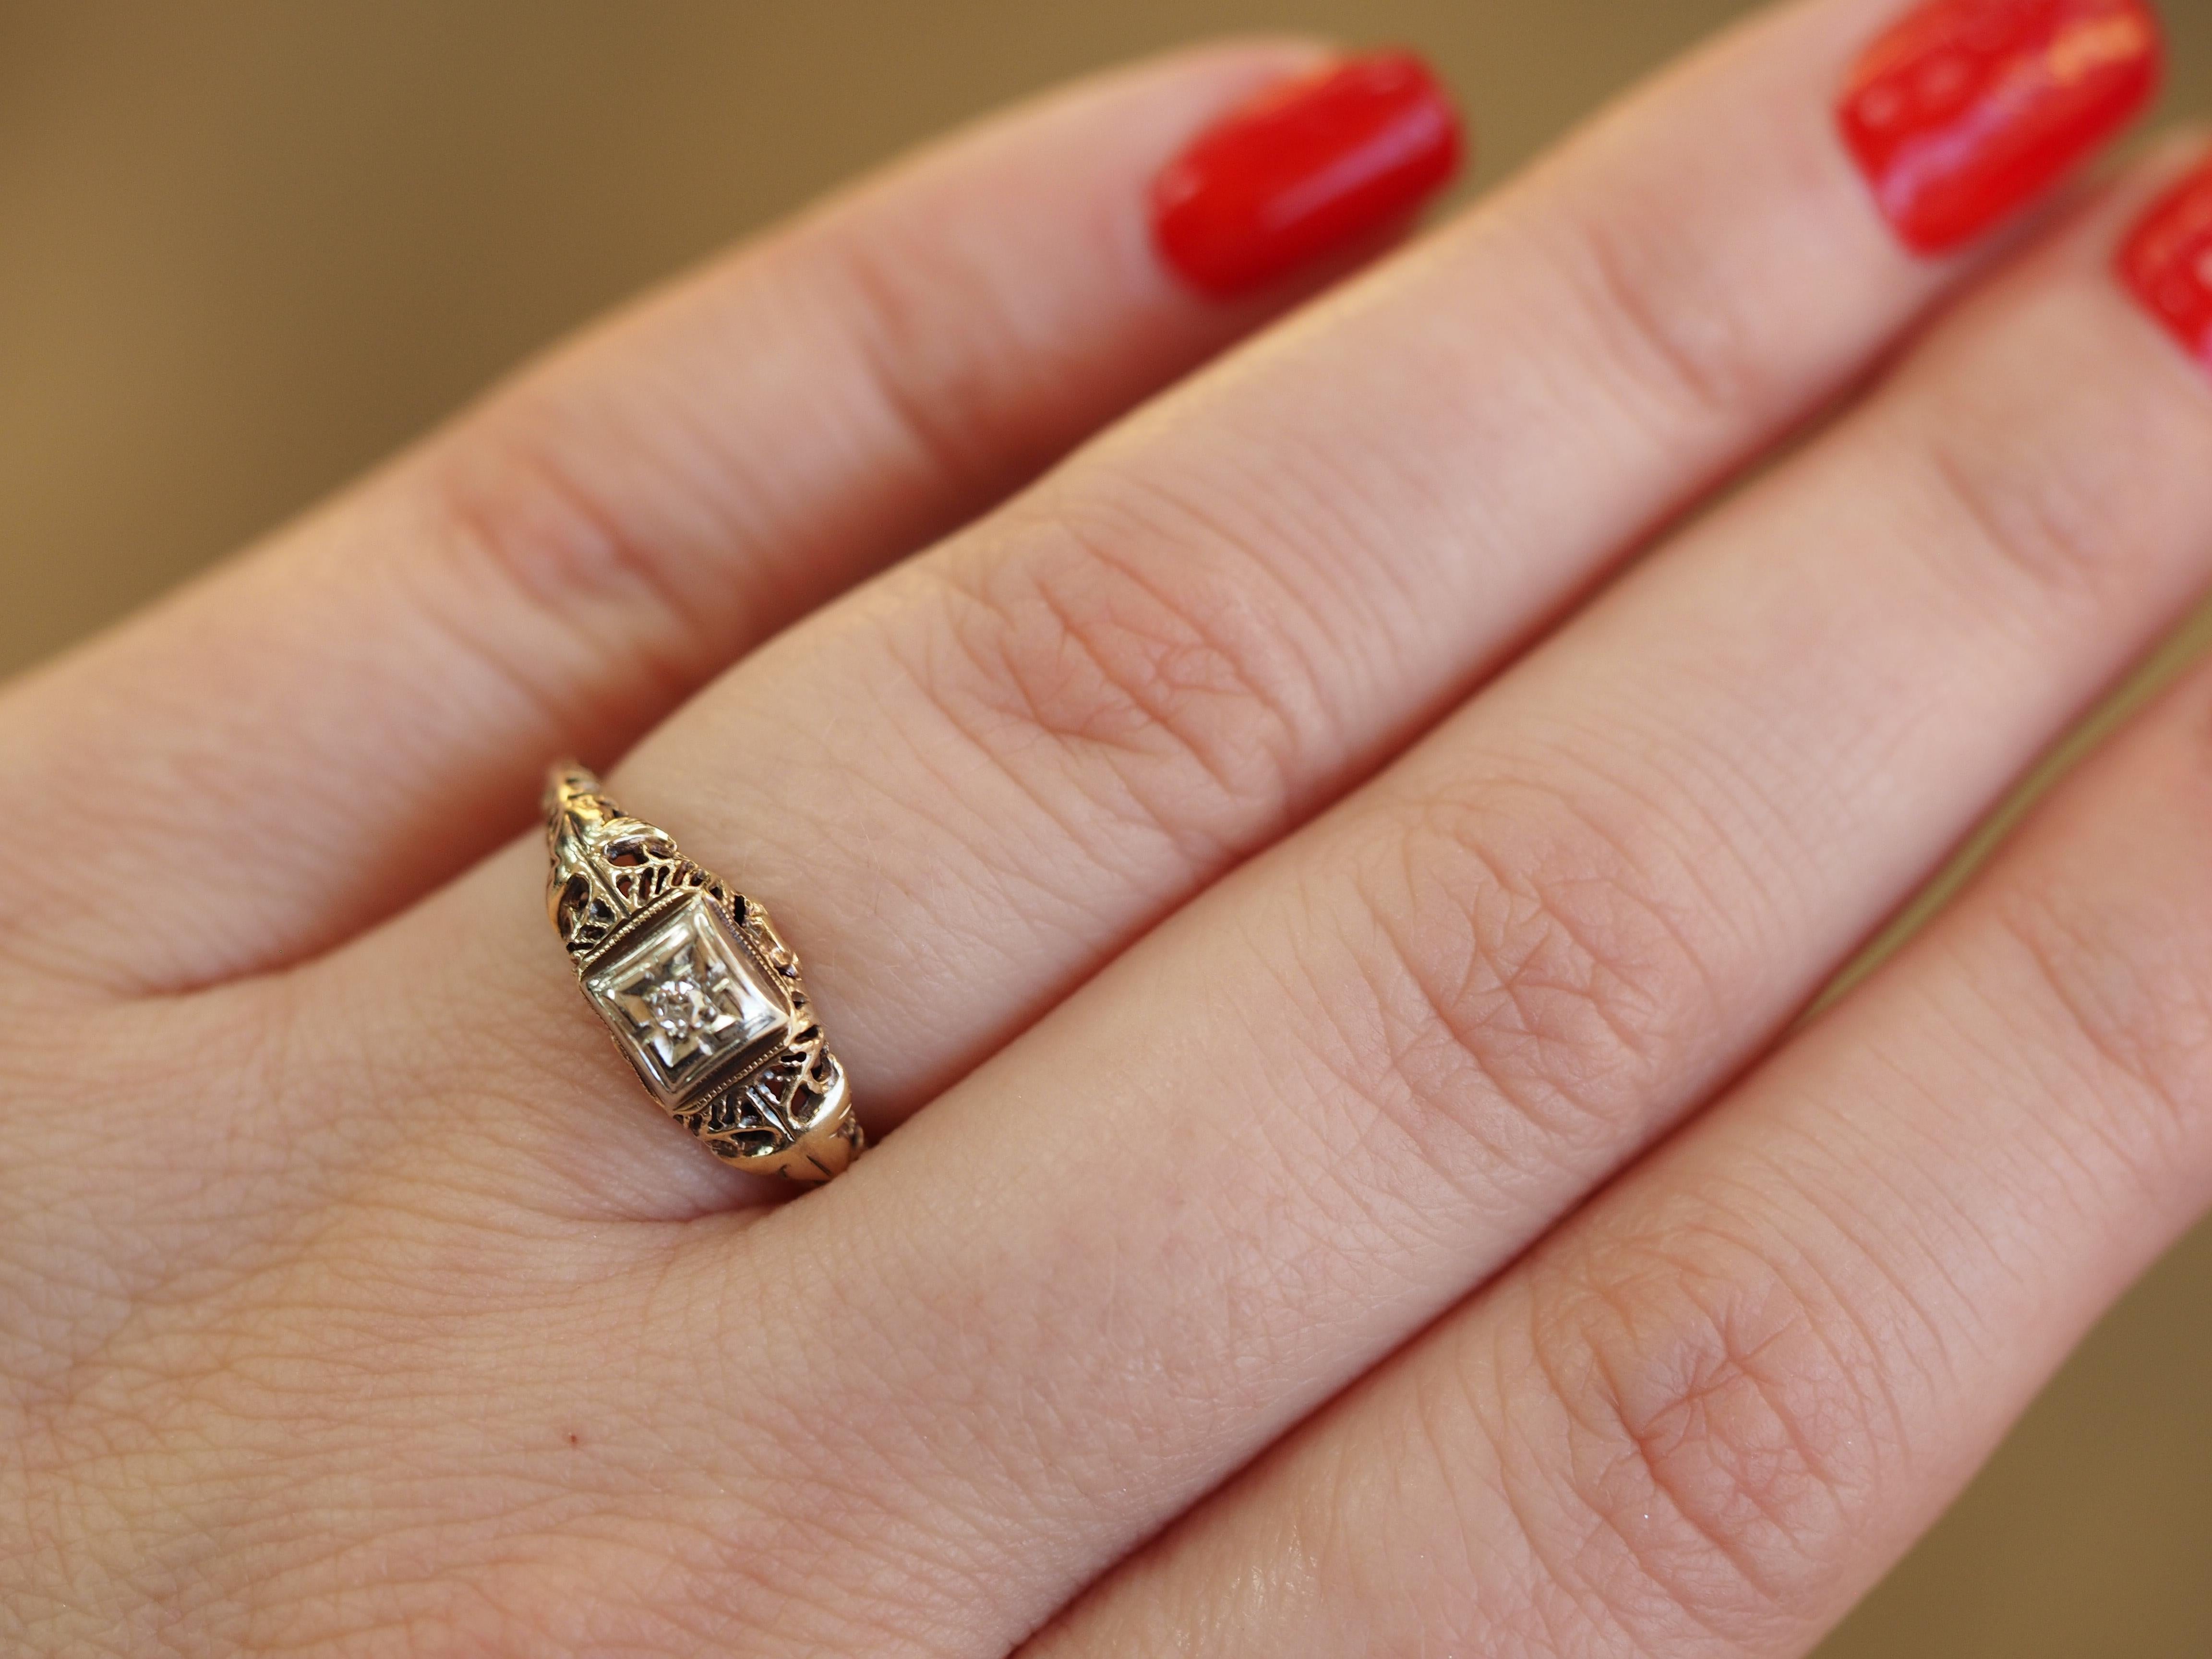 This Art Deco solitaire is a fine example of a filigree solitaire engagement ring crafted in 10 karat white & yellow gold. The 0.03 ct Single cut diamond is held high in four prongs showcasing the solitaire from all sides! The filigree design twists